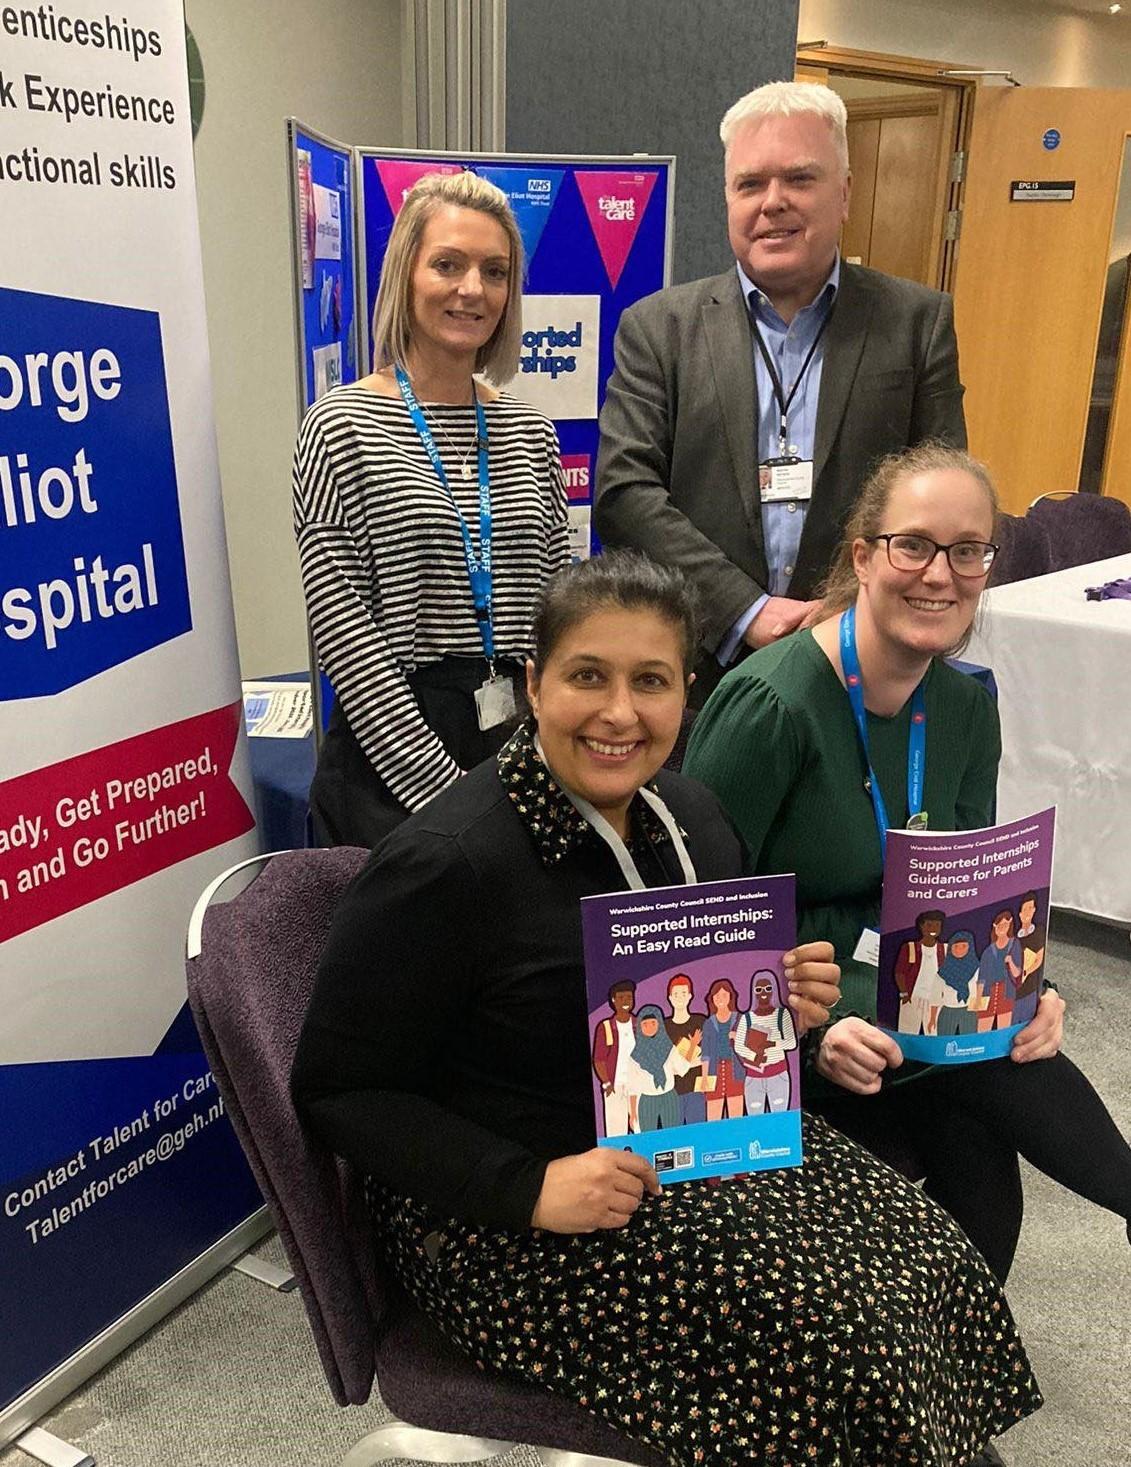 Pictured: (Back L-R) Kirsty Payne, Hereward College and Cllr Martin Watson, WCC portfolio holder for Economy. (Front L-R) Cllr Kam Kaur, WCC portfolio holder for Education and Clare Barlow, Talent for Care Facilitator, George Eliot Hospital